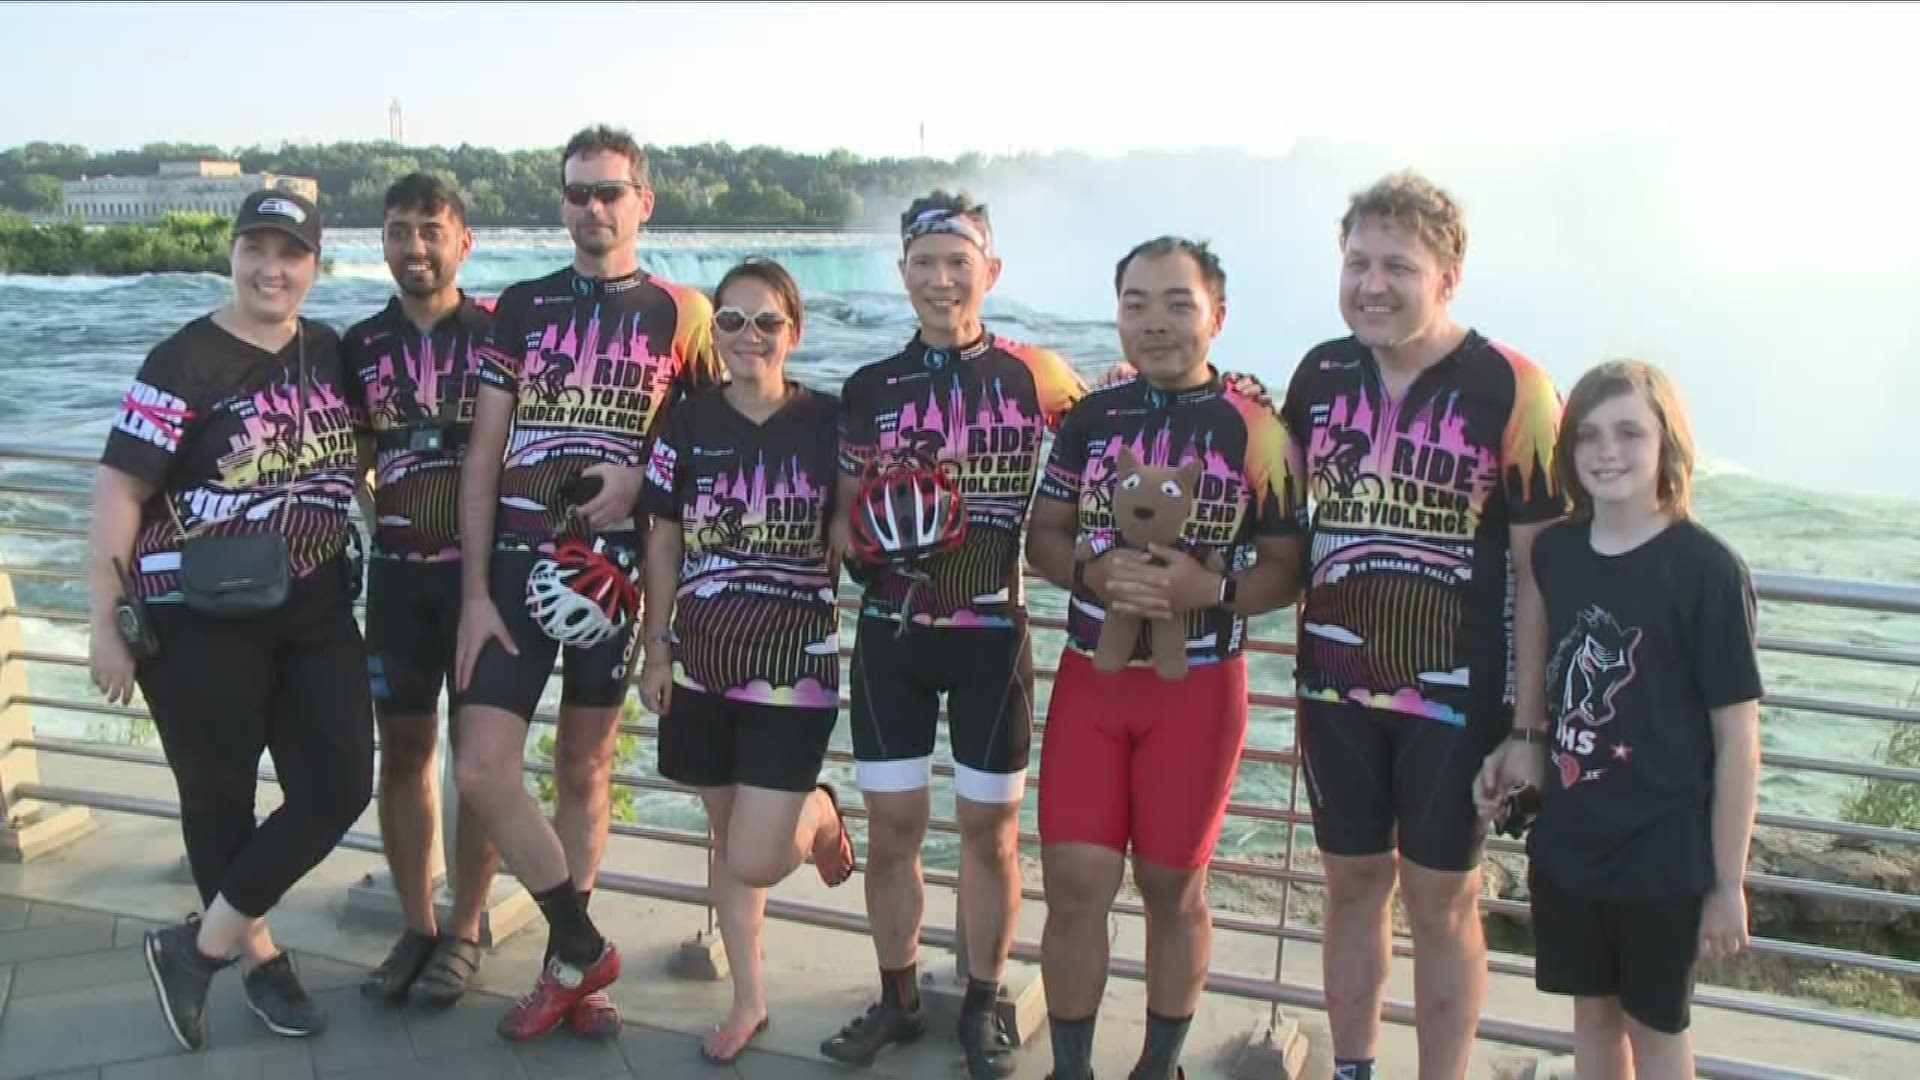 Cyclists ride across the state to end gender violence